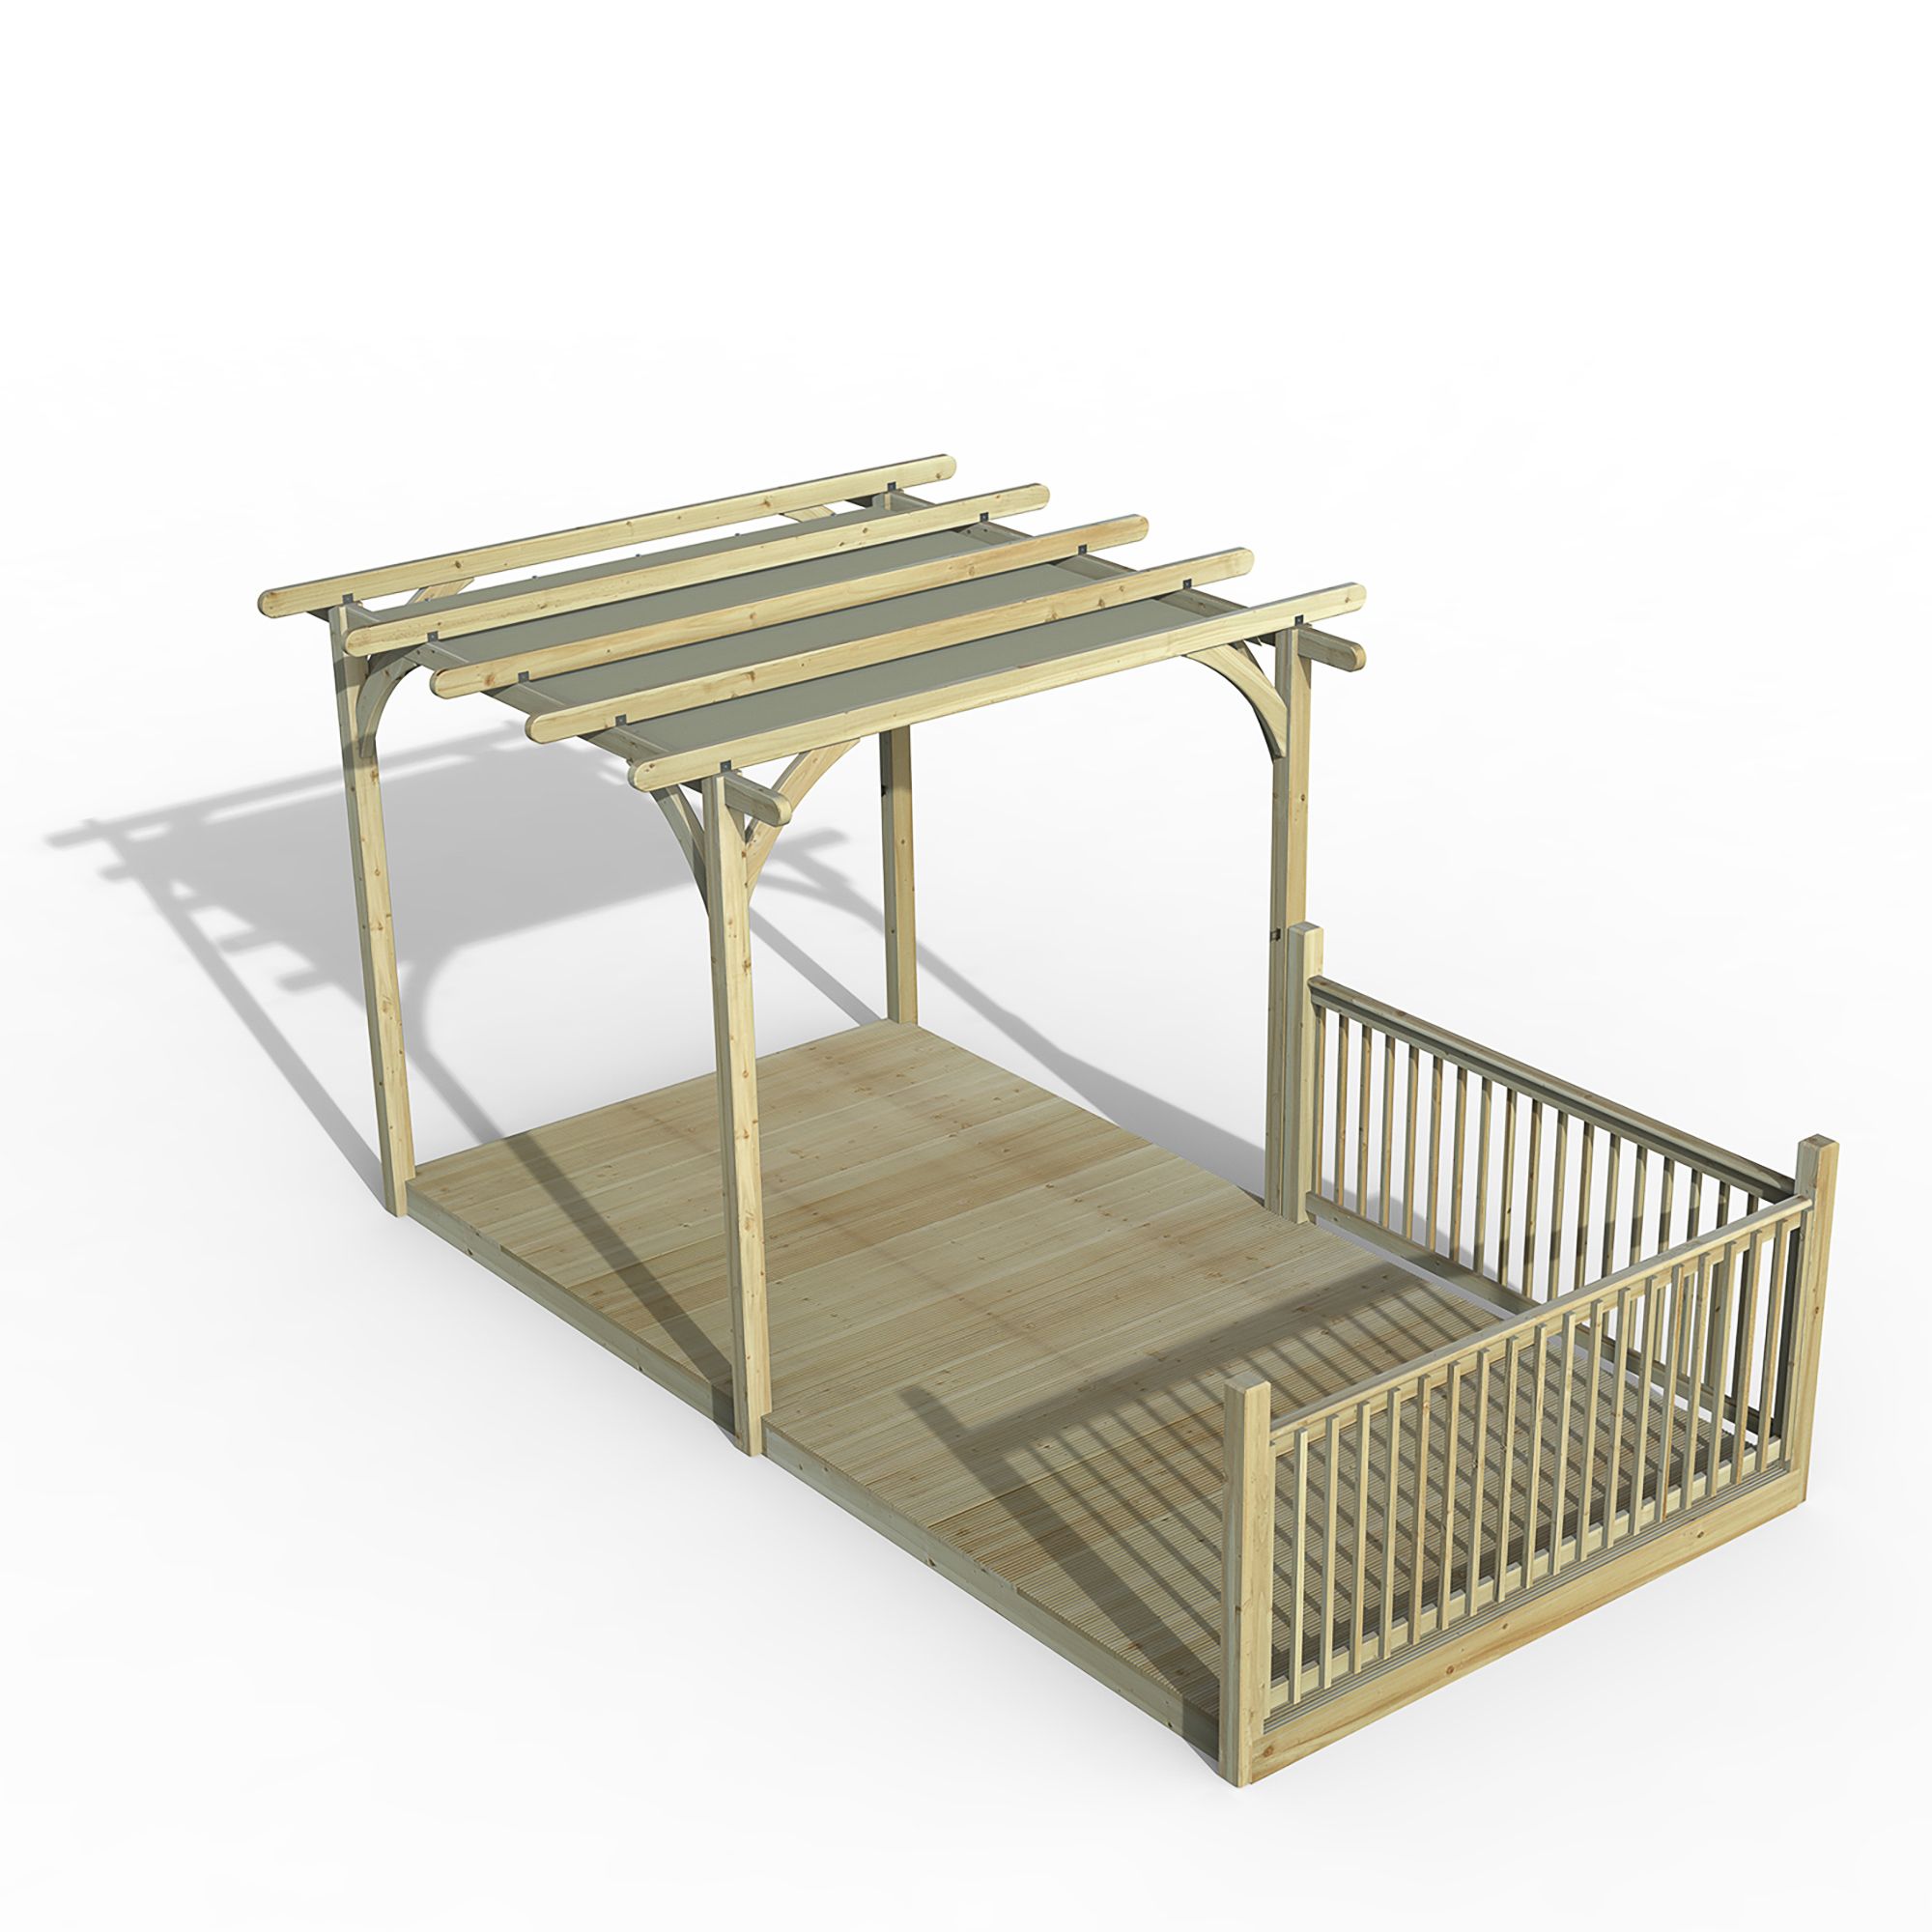 Forest Garden Grey Rectangular Pergola & decking kit, x3 Post x2 Balustrade (H) 2.5m x (W) 5.2m - Canopy included